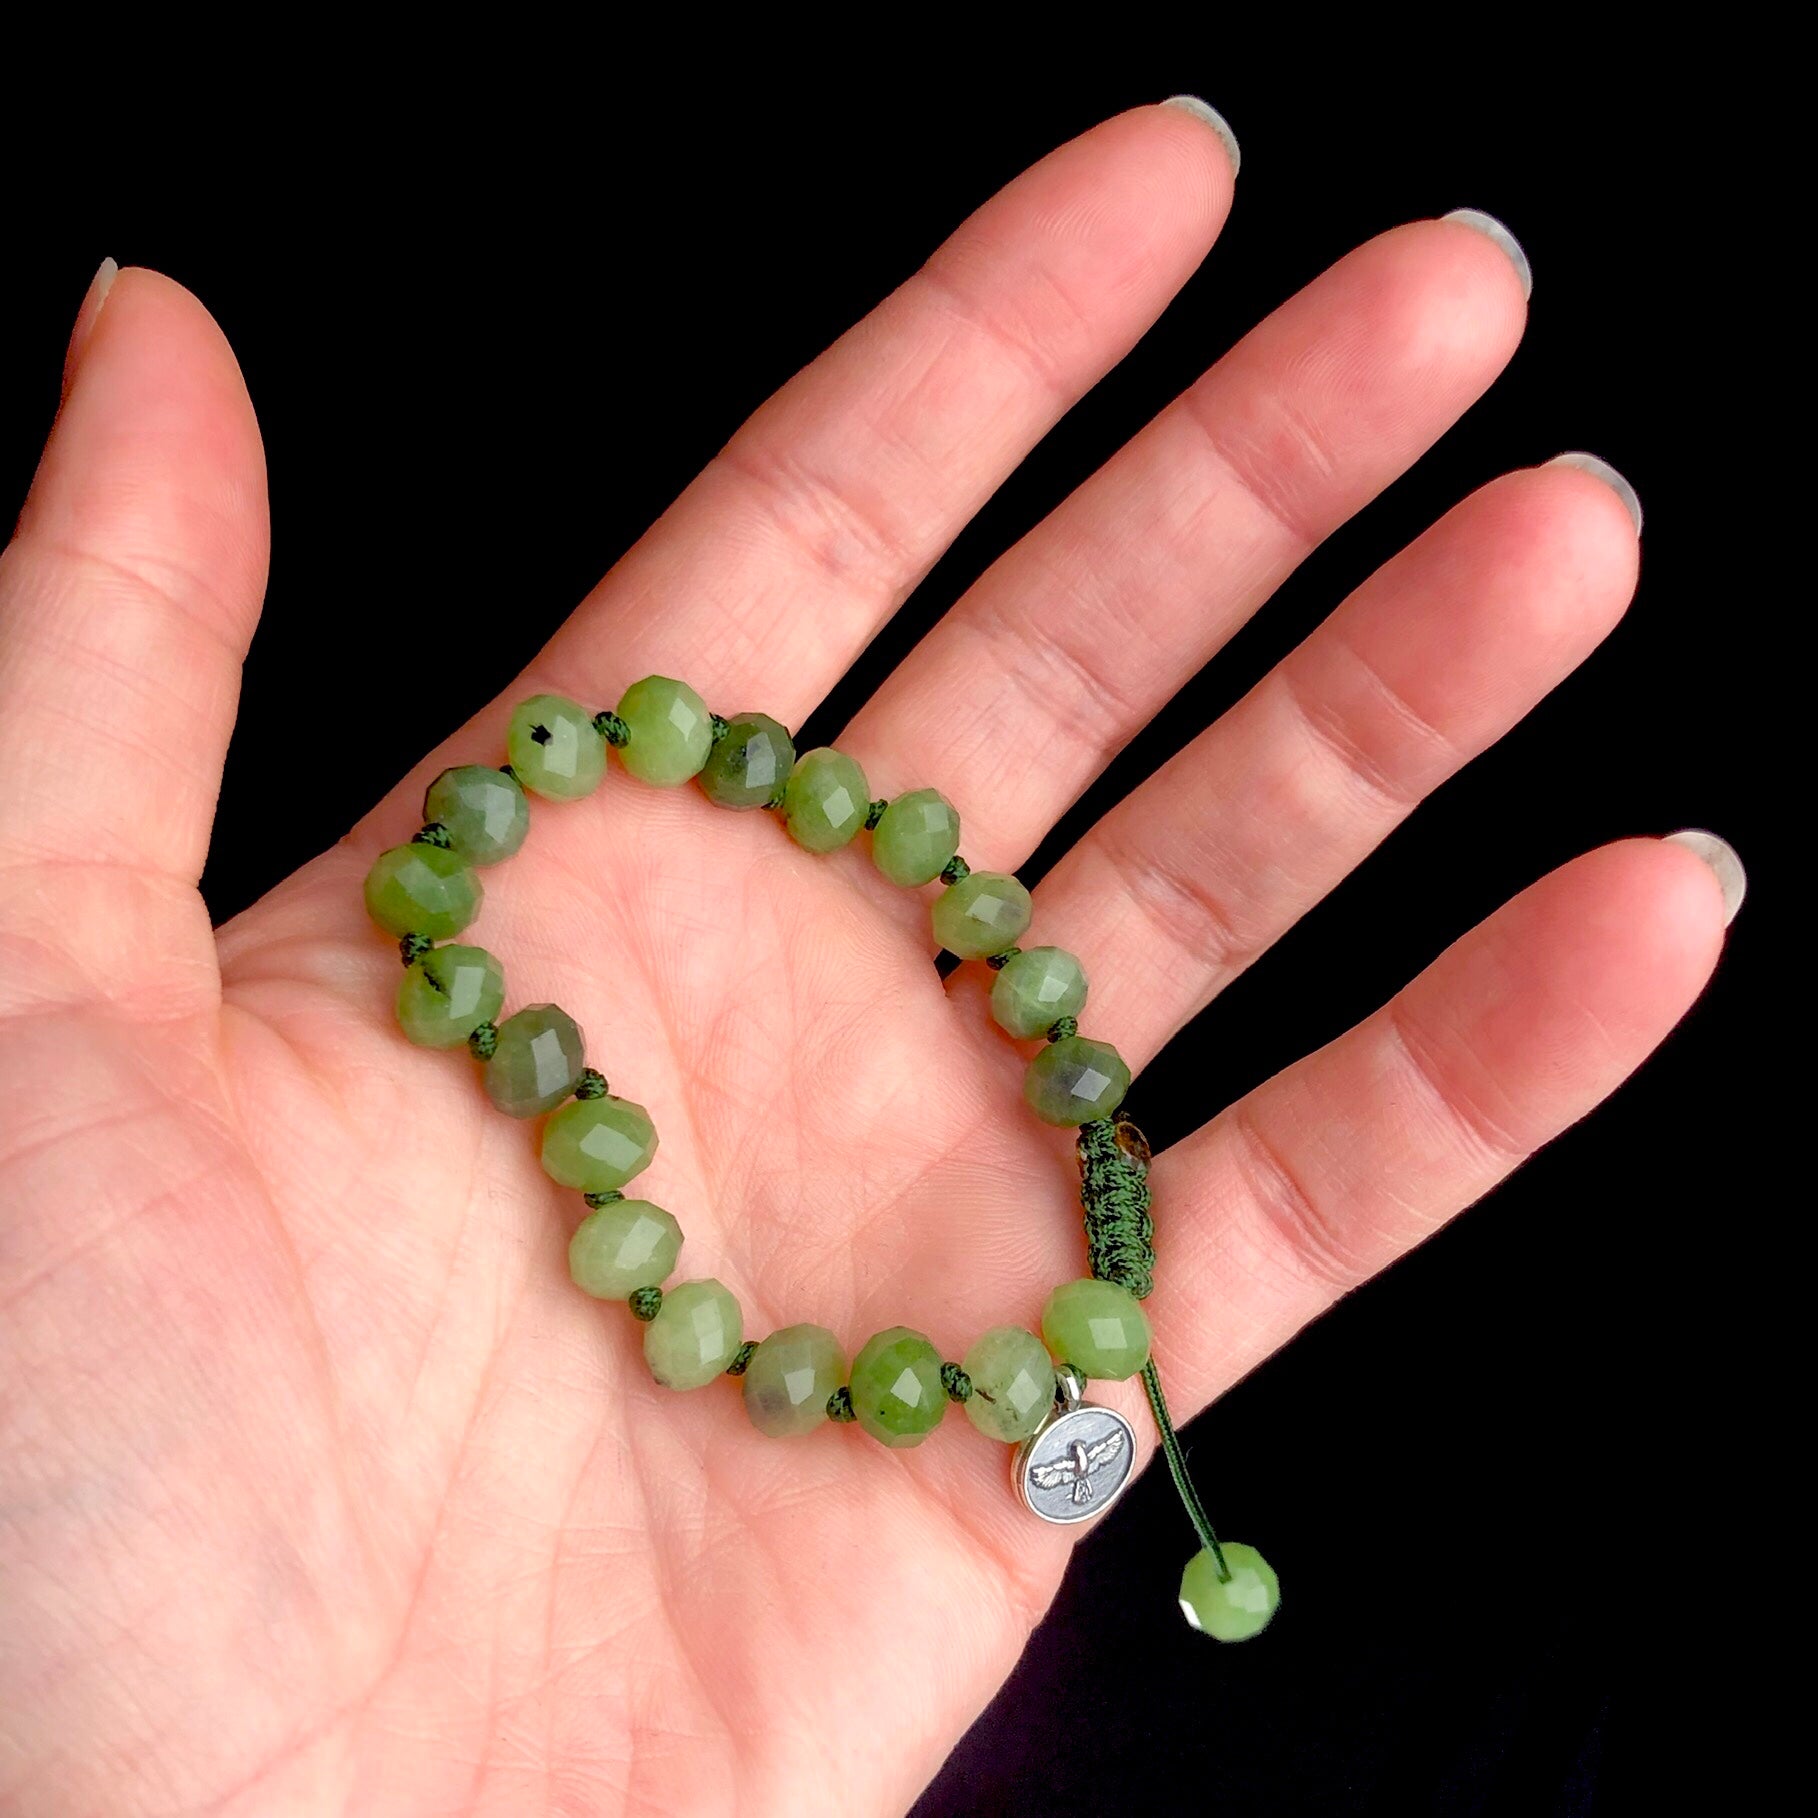 Opaque forest green colored bead bracelet knotted with dark green cord shown in hand